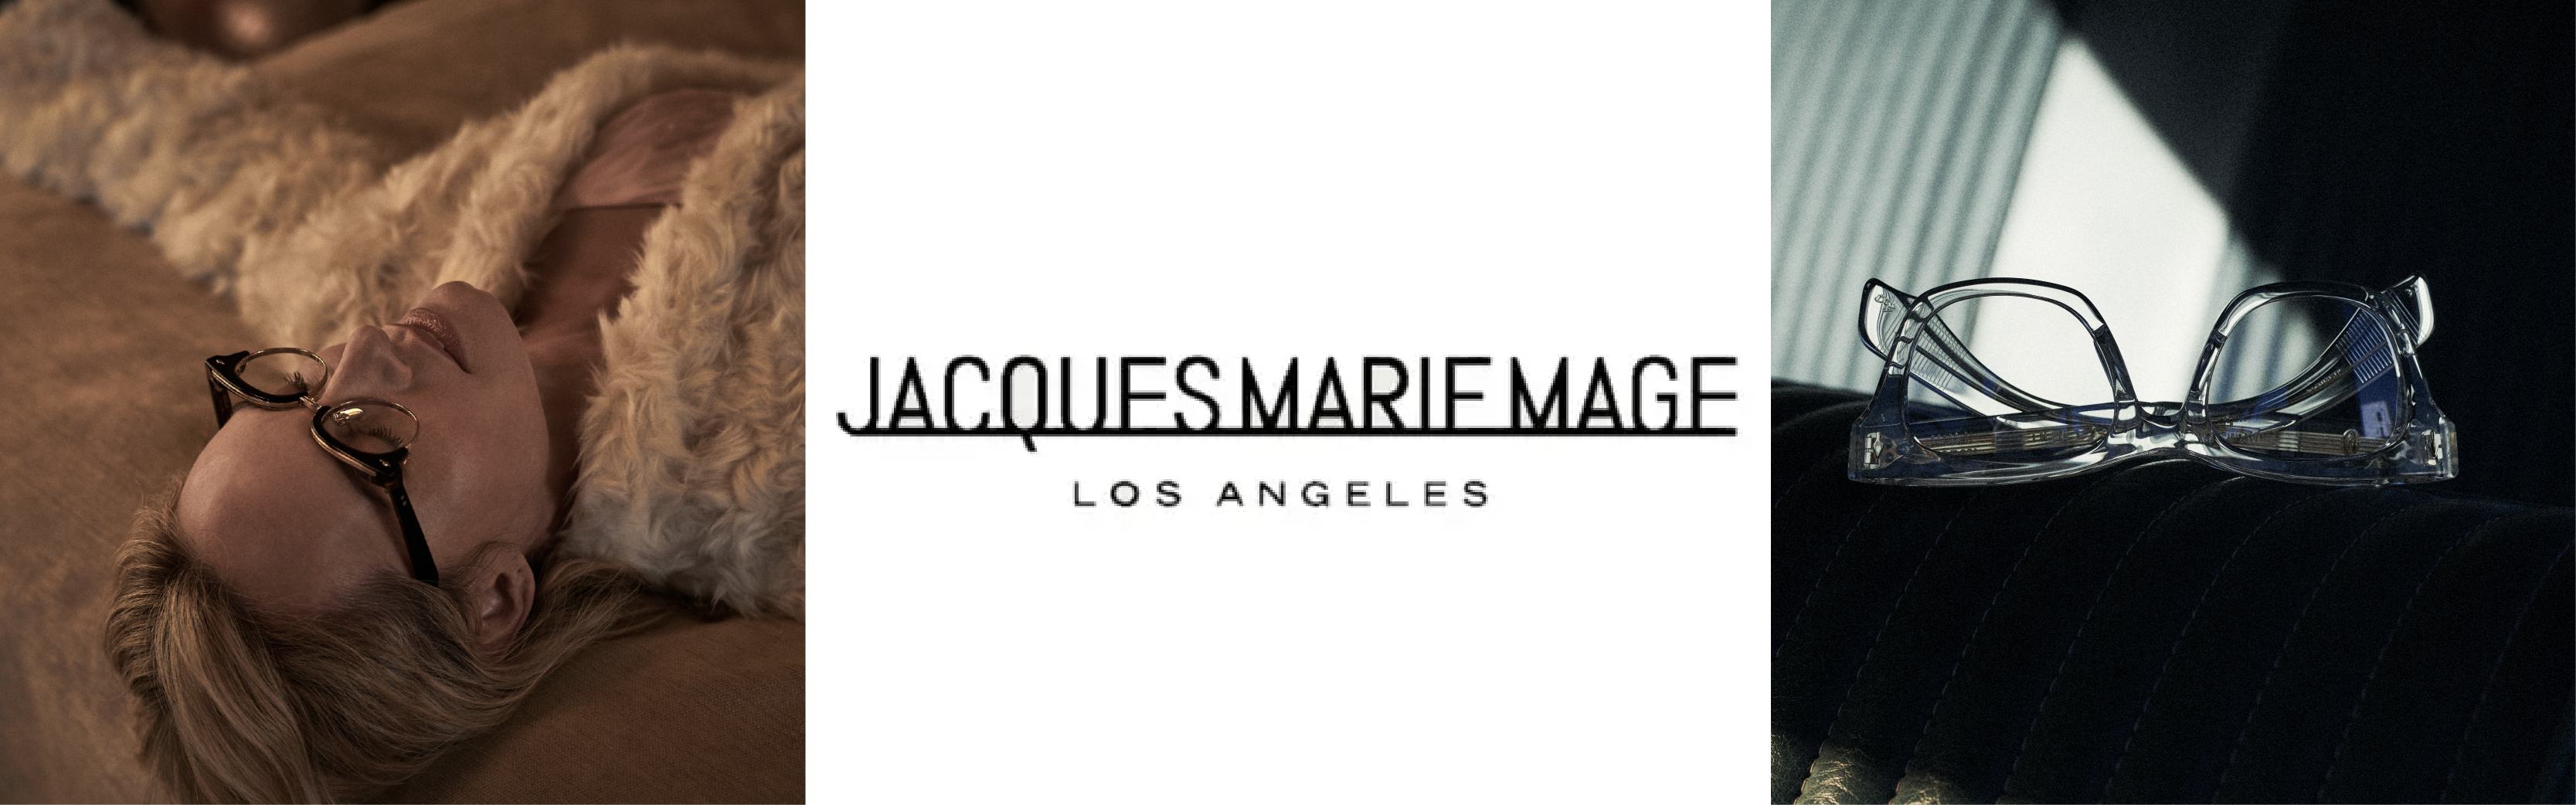 Jacques Marie Mage Optical